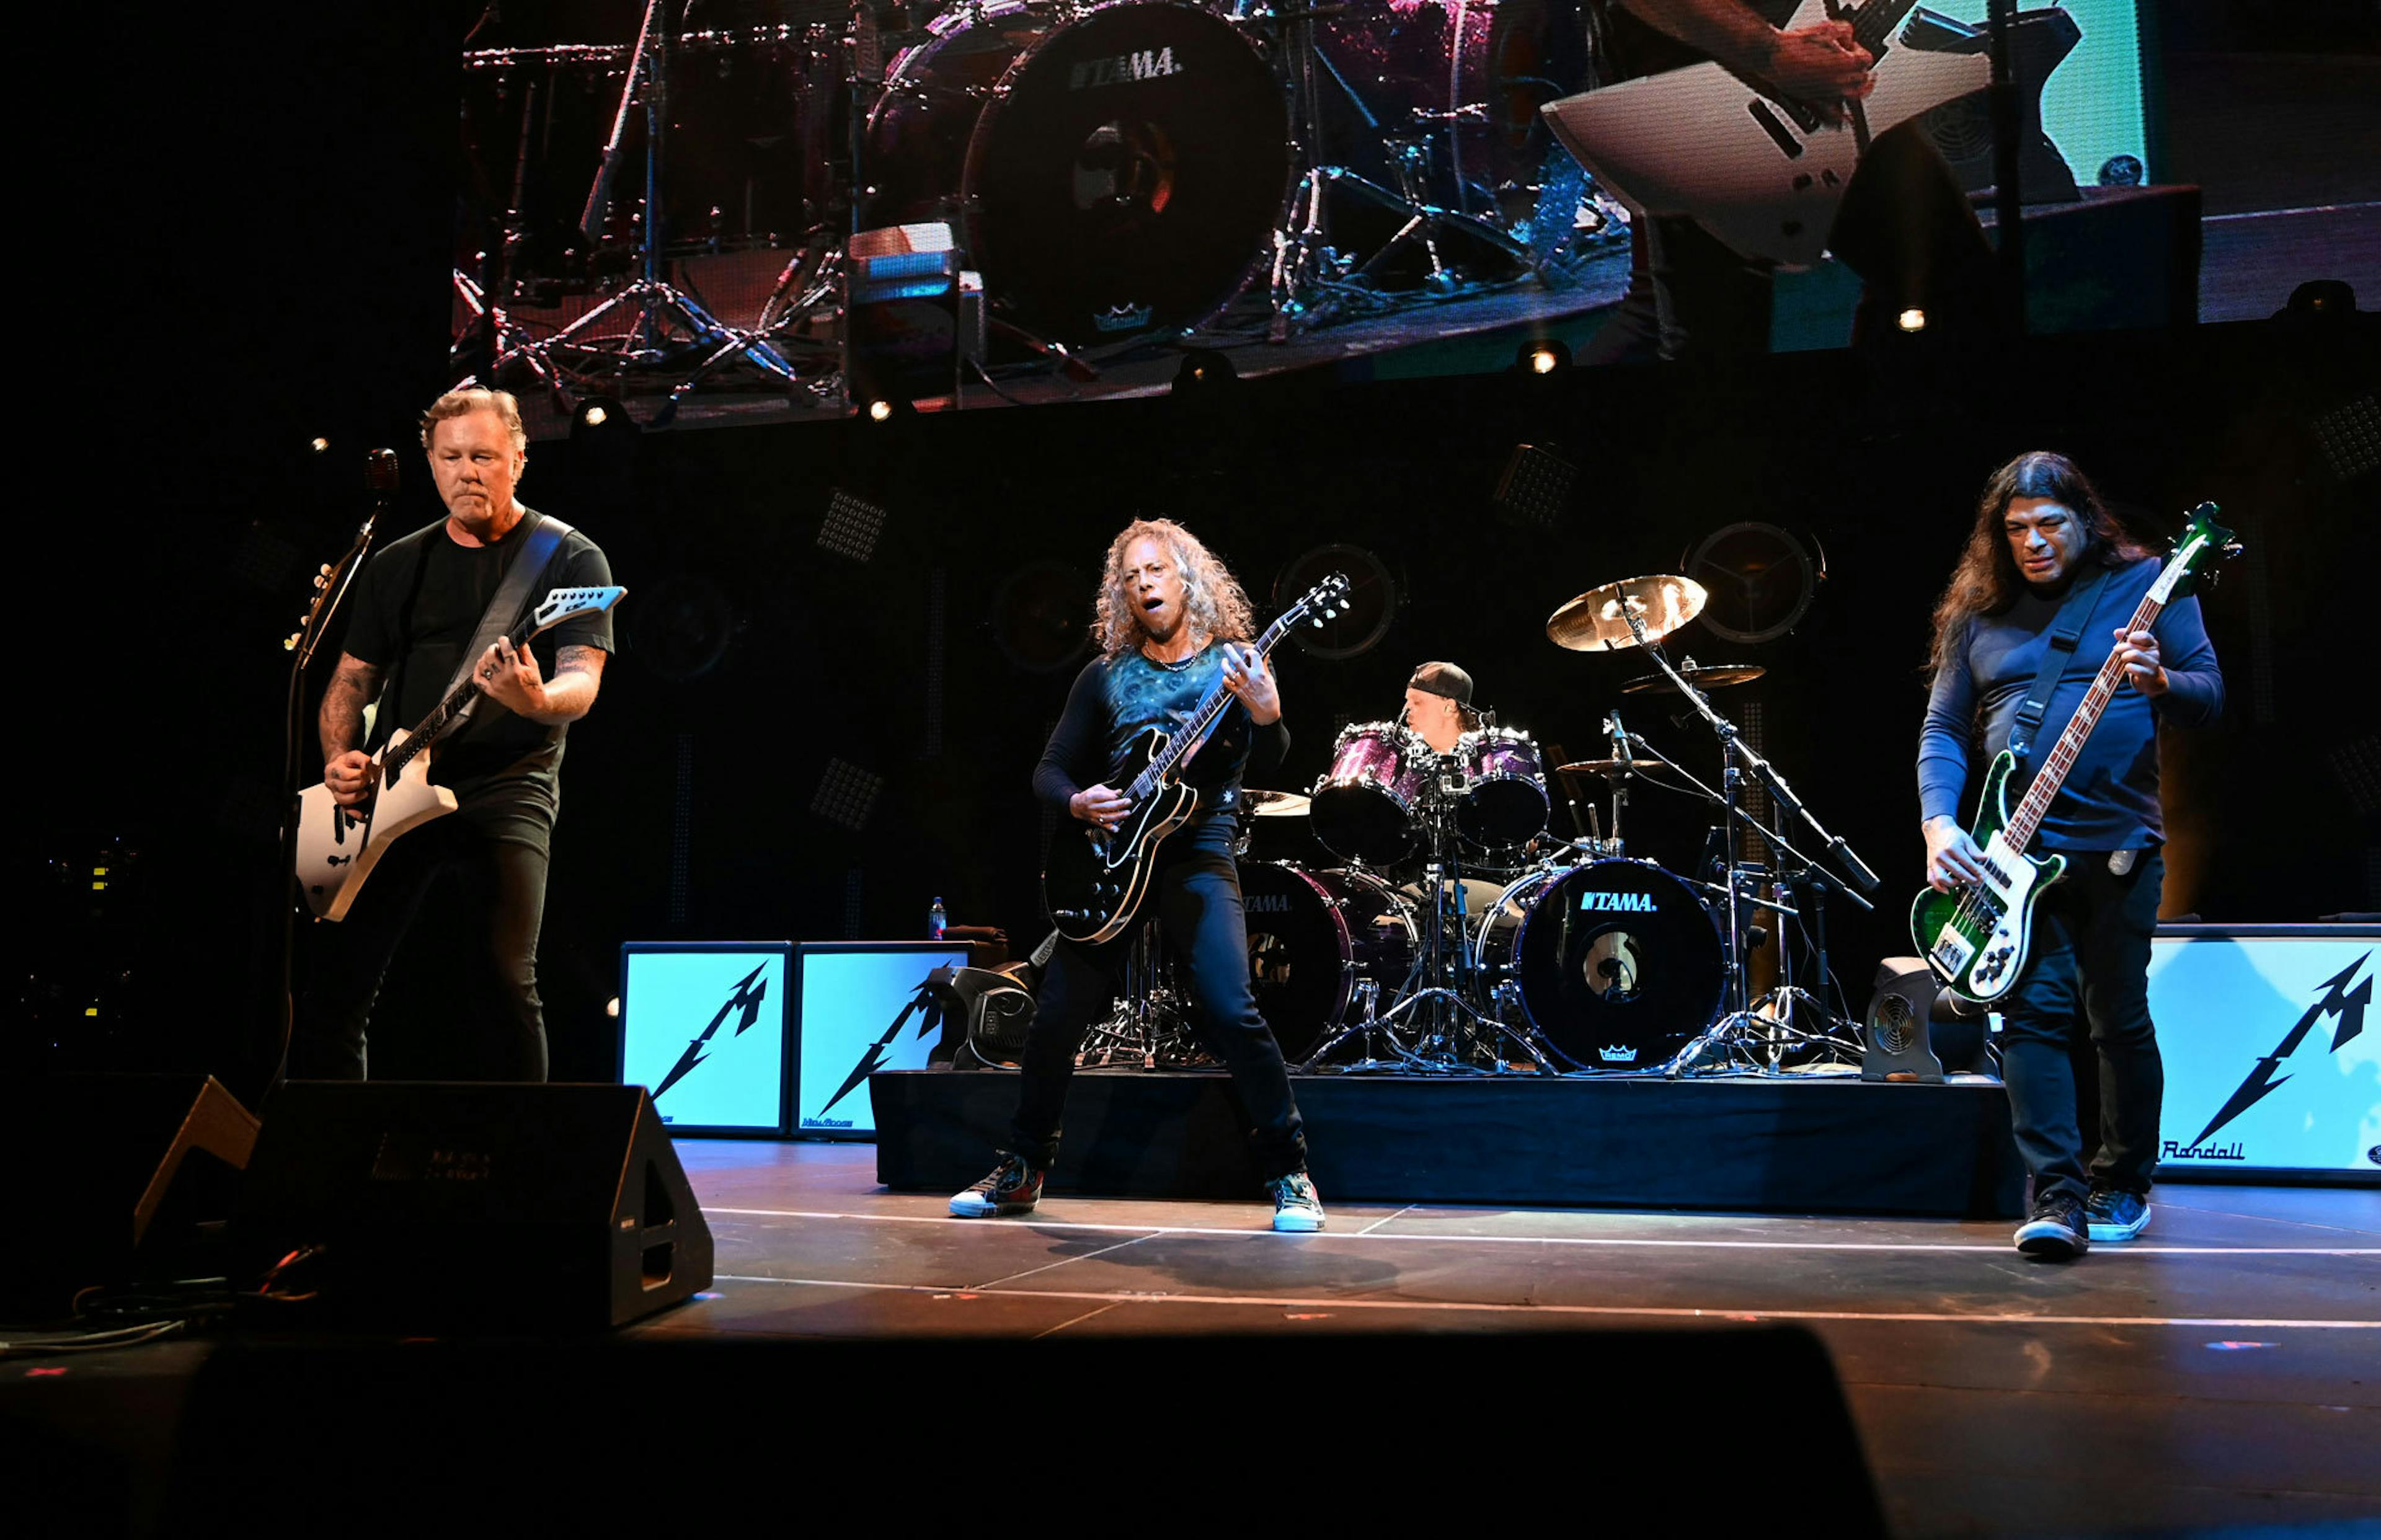 Watch Metallica's Full Set From The Chris Cornell Tribute Concert